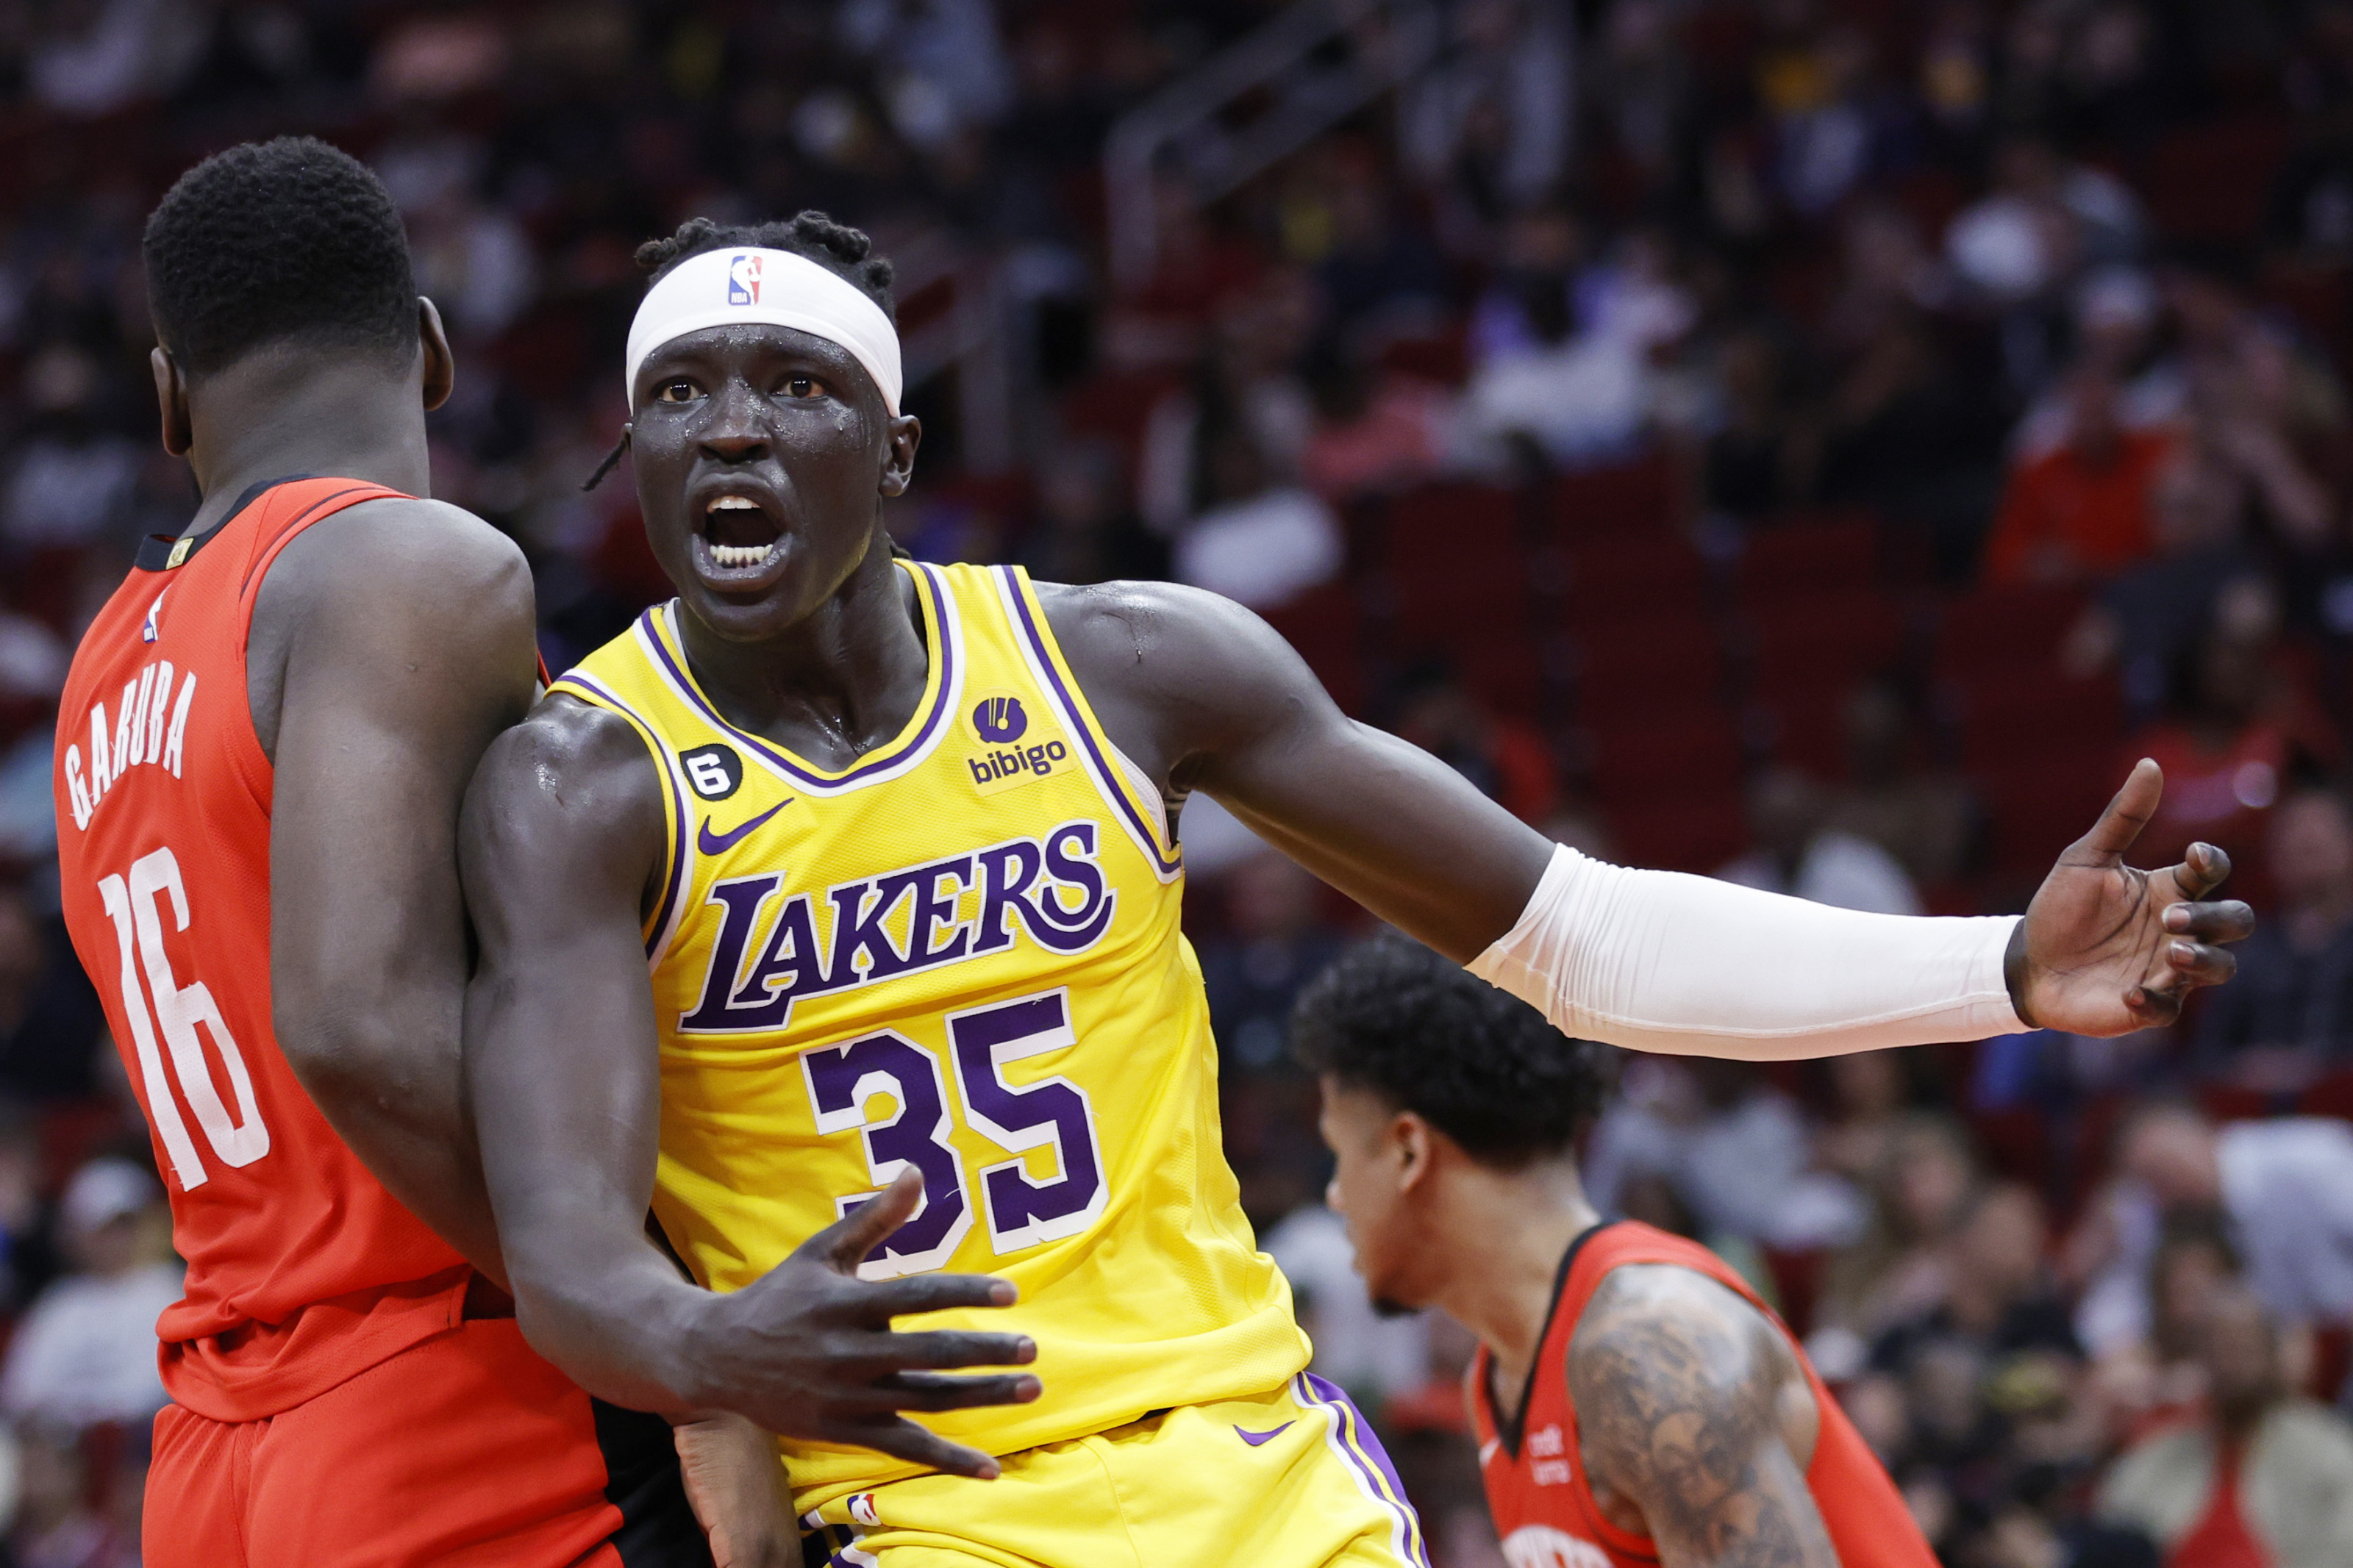 He is just a new Celtic, has Jrue Holiday revealed he wanted to be a Laker  instead?